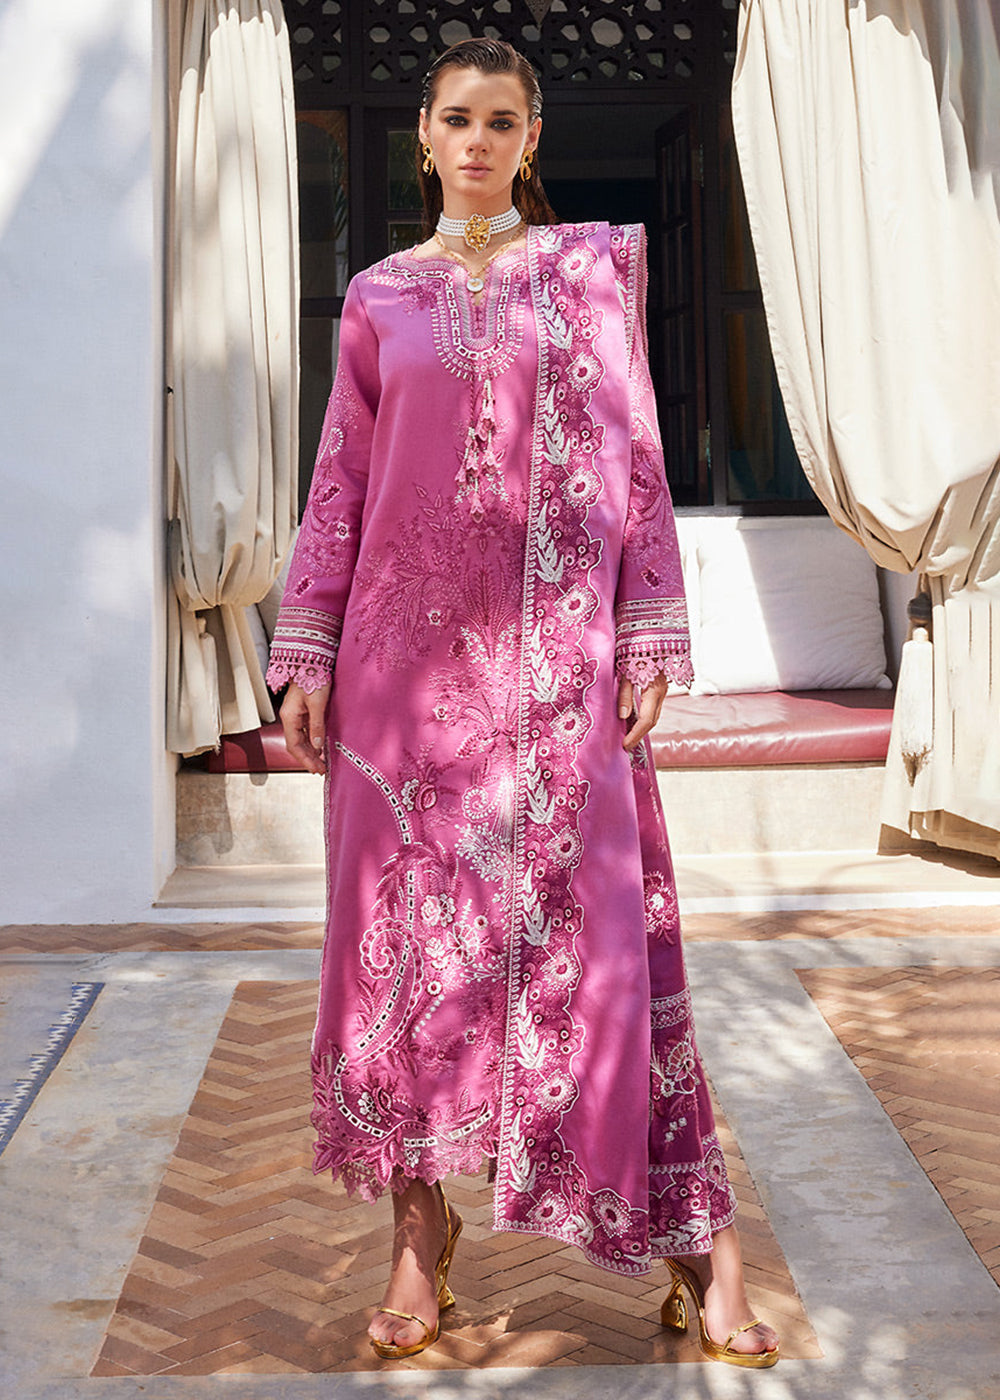 Buy Now Moroccan Dreams '23 by Mushq - ALEAH at Empress Online in USA, UK, Canada & Worldwide at Empress Clothing. 